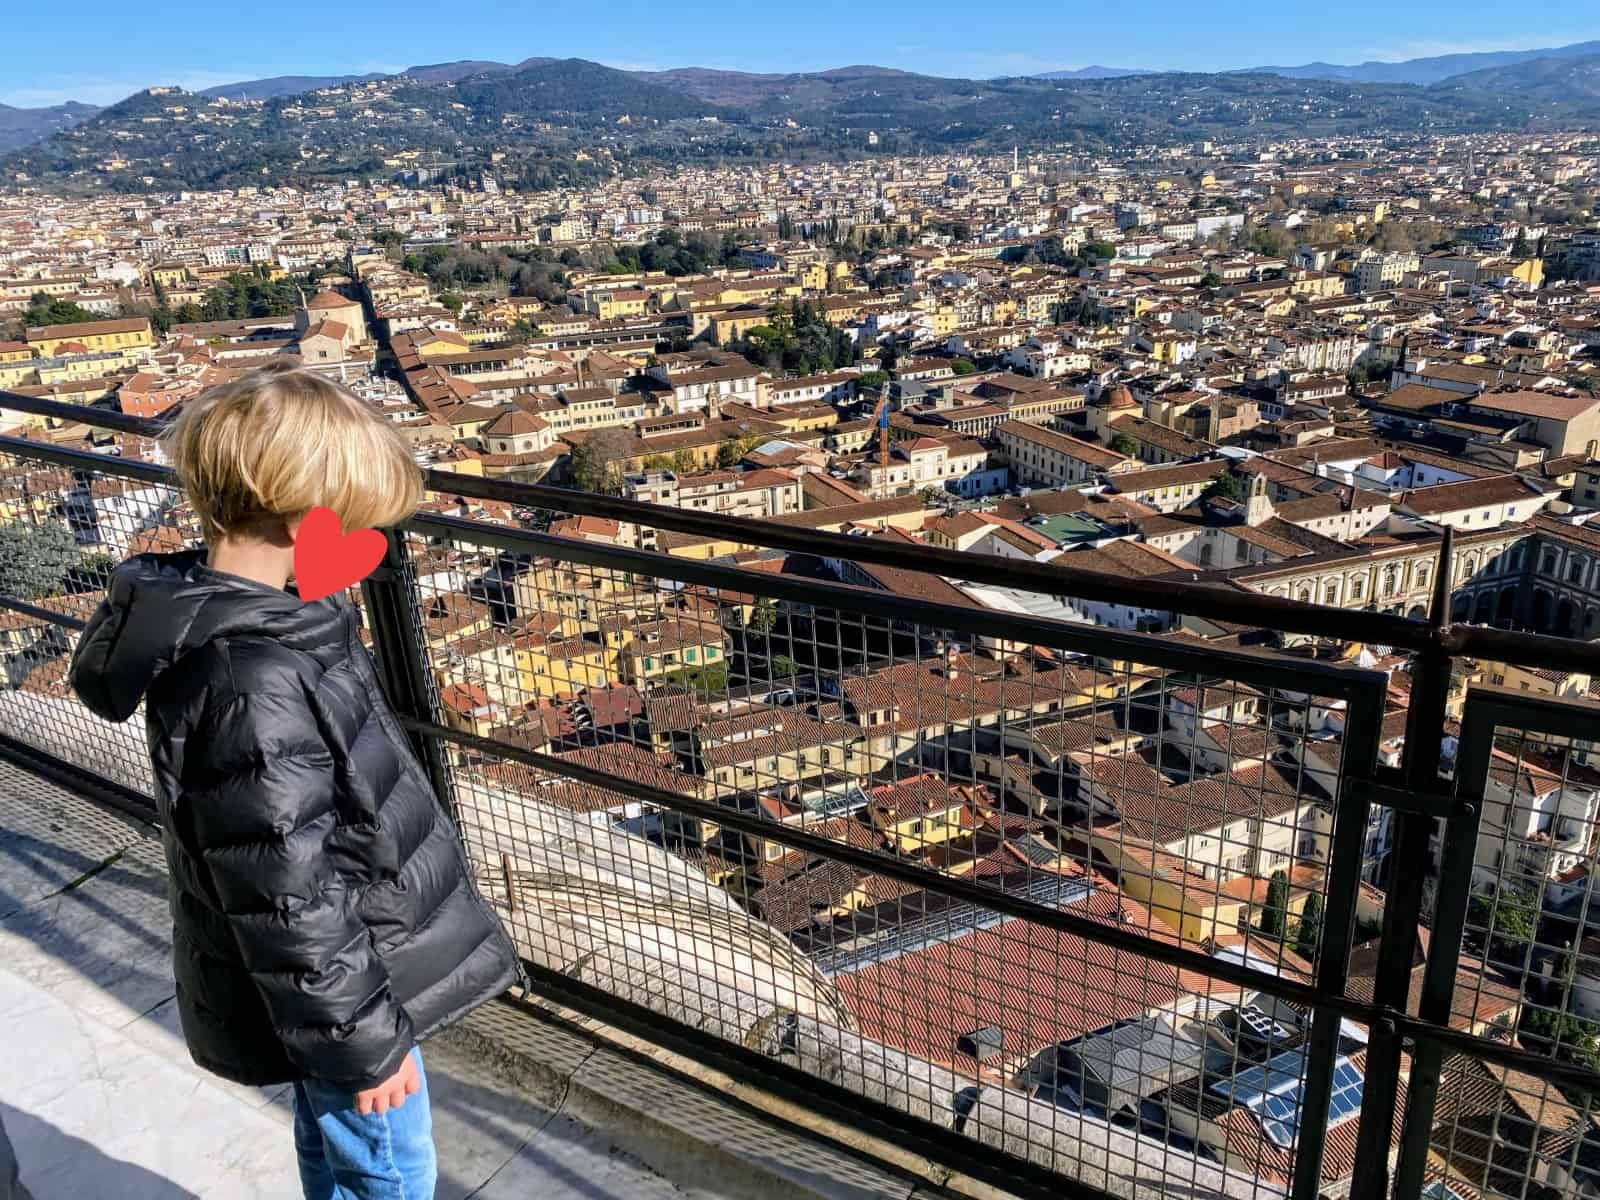 Boy looking at the view of Florence from the top of the Duomo climb. His face is covered with a red graphic heart.